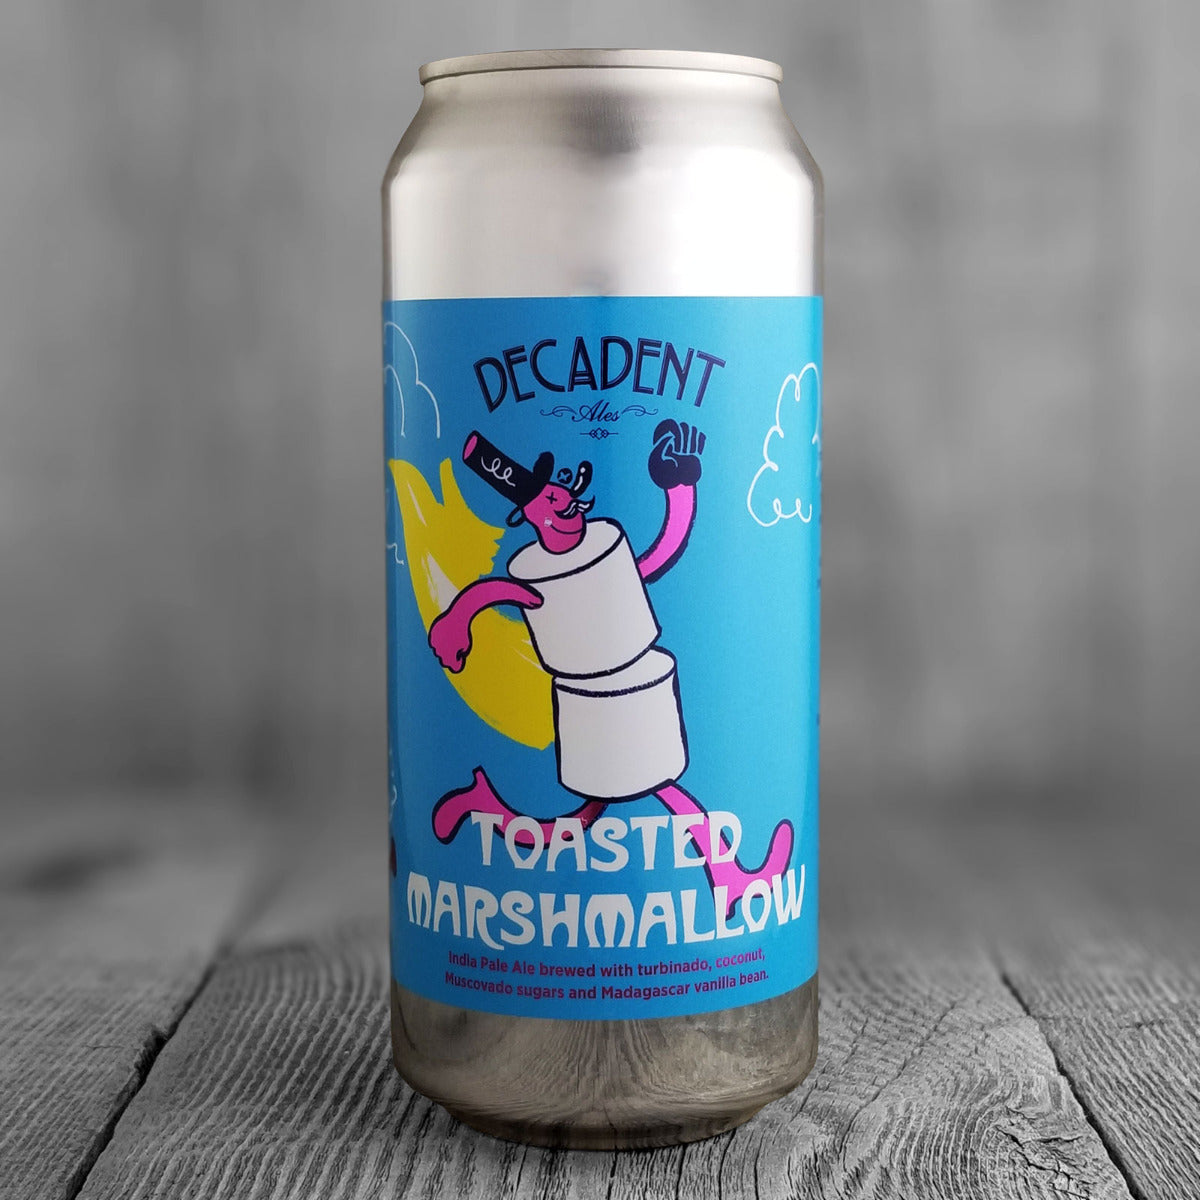 Decadent Ales Toasted Marshmallow